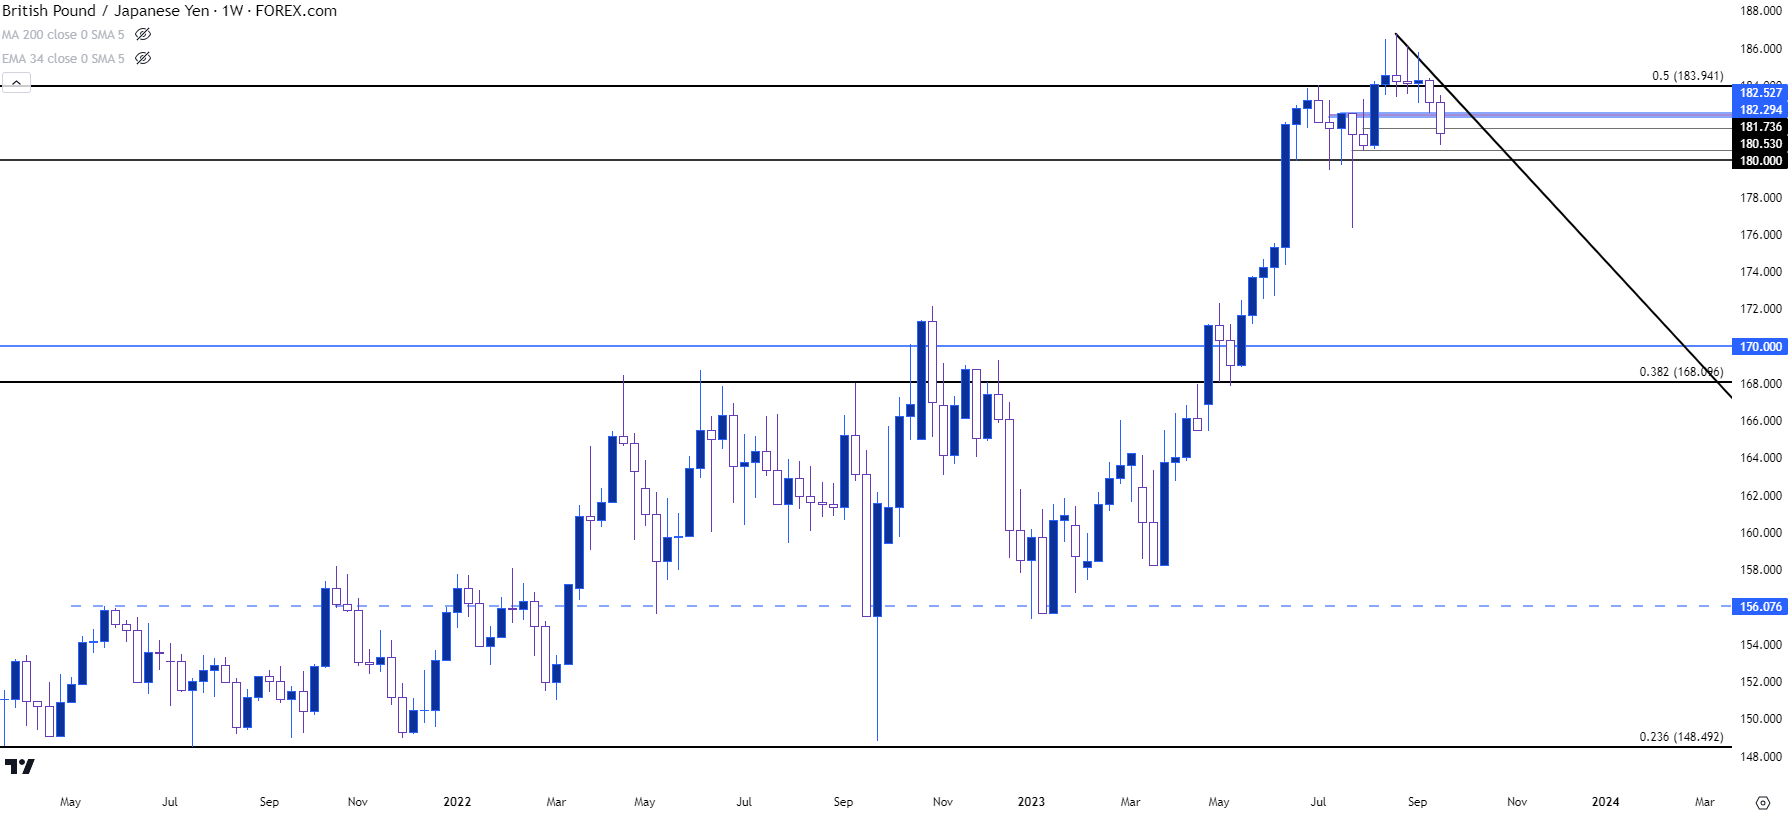 gbpjpy weekly 92123